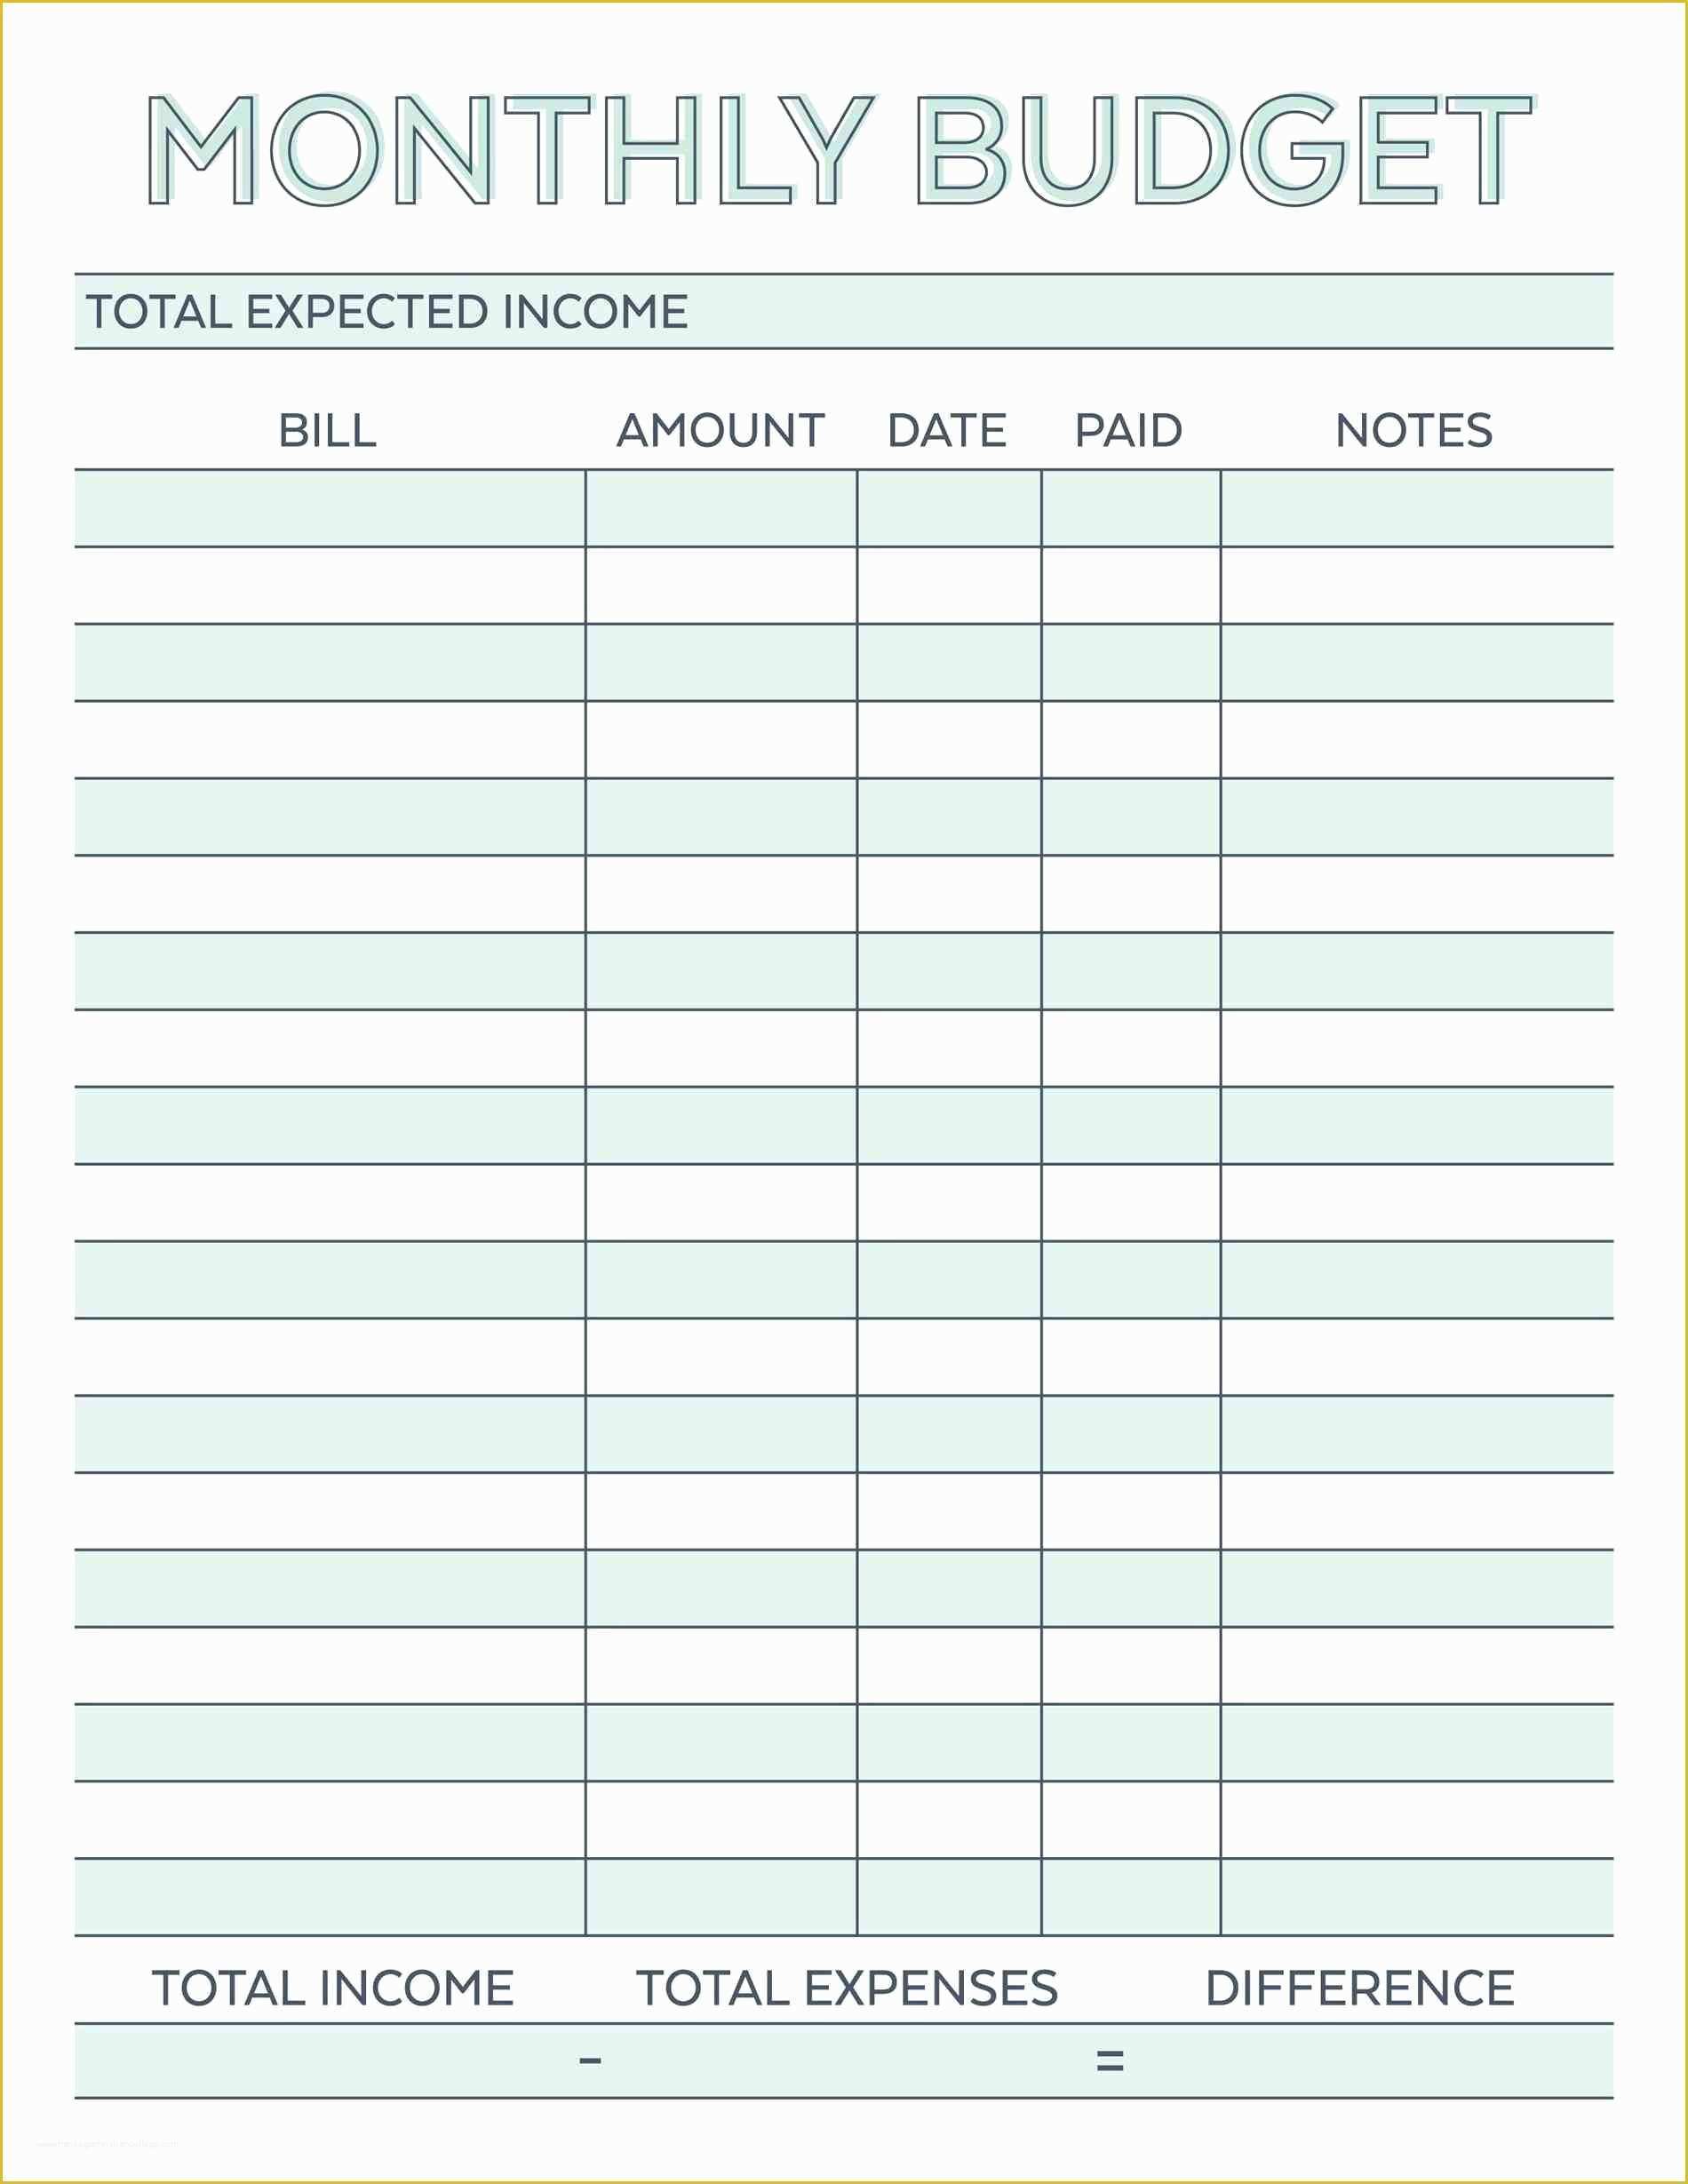 Financial Budget Template Free Of Bud Planner Planner Worksheet Monthly Bills Template